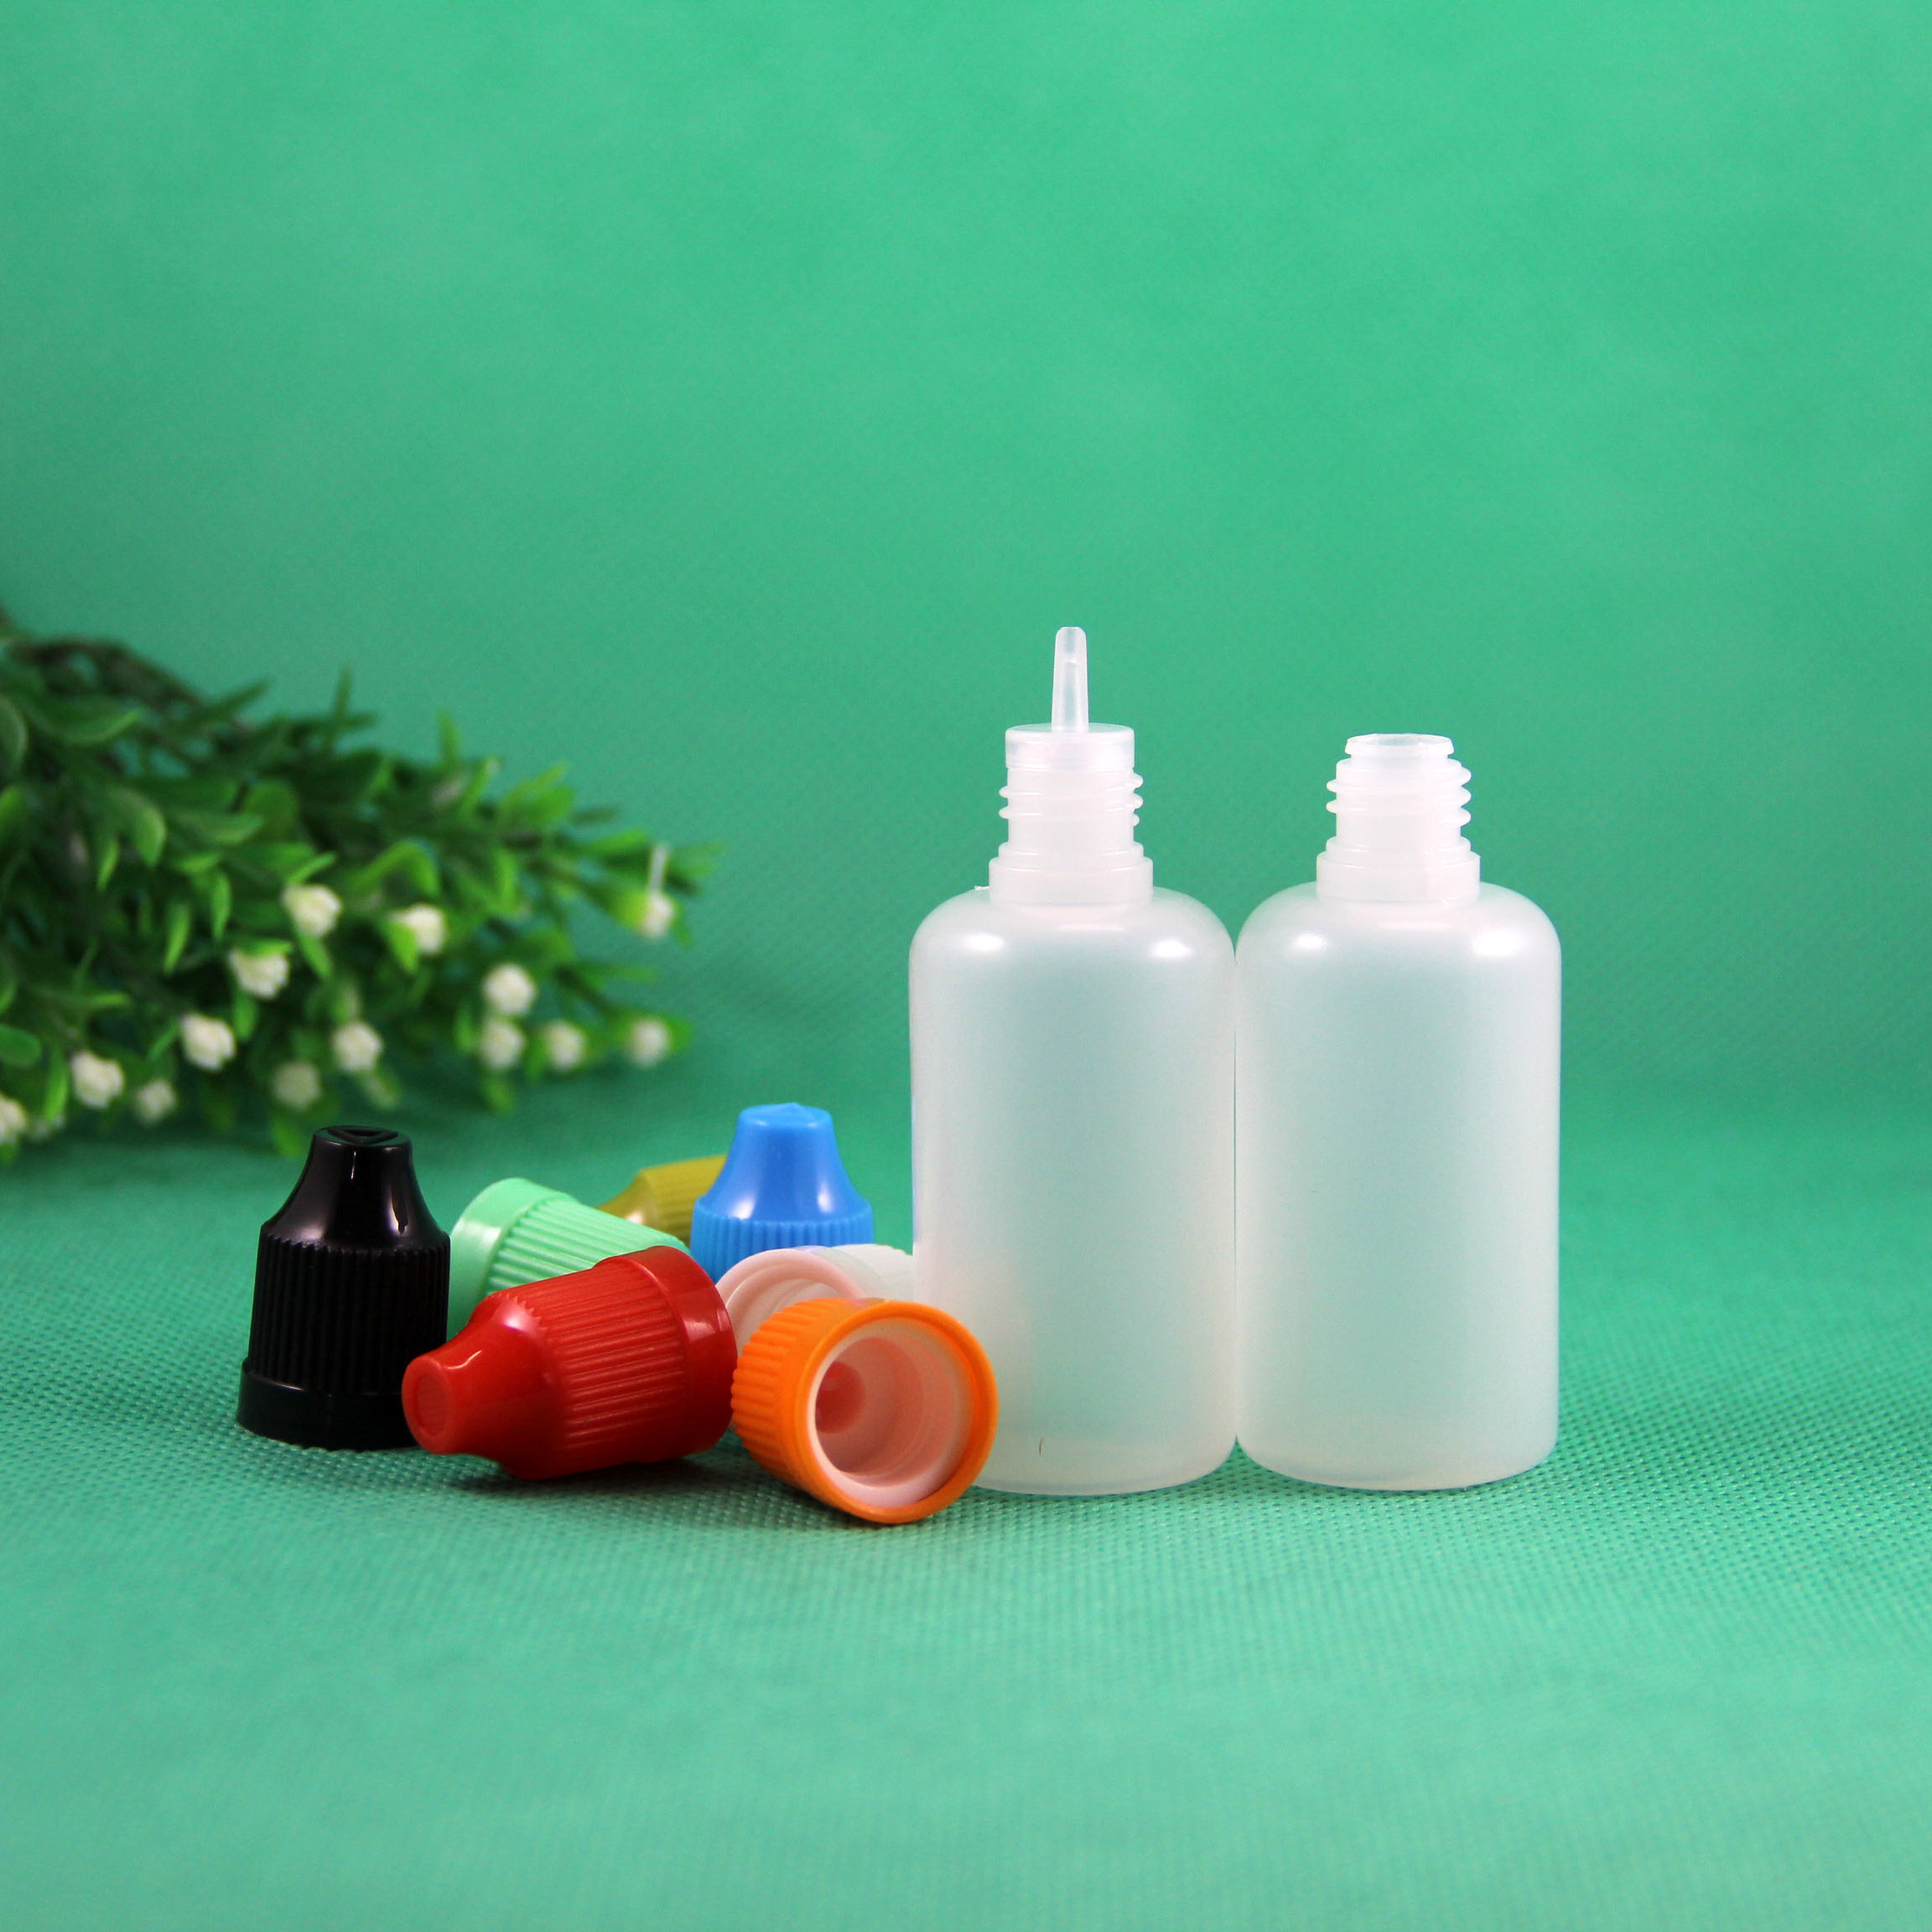 100 Sets 30 ml LDPE CHILD PROOF Dropper Bottles Long Thin Tips